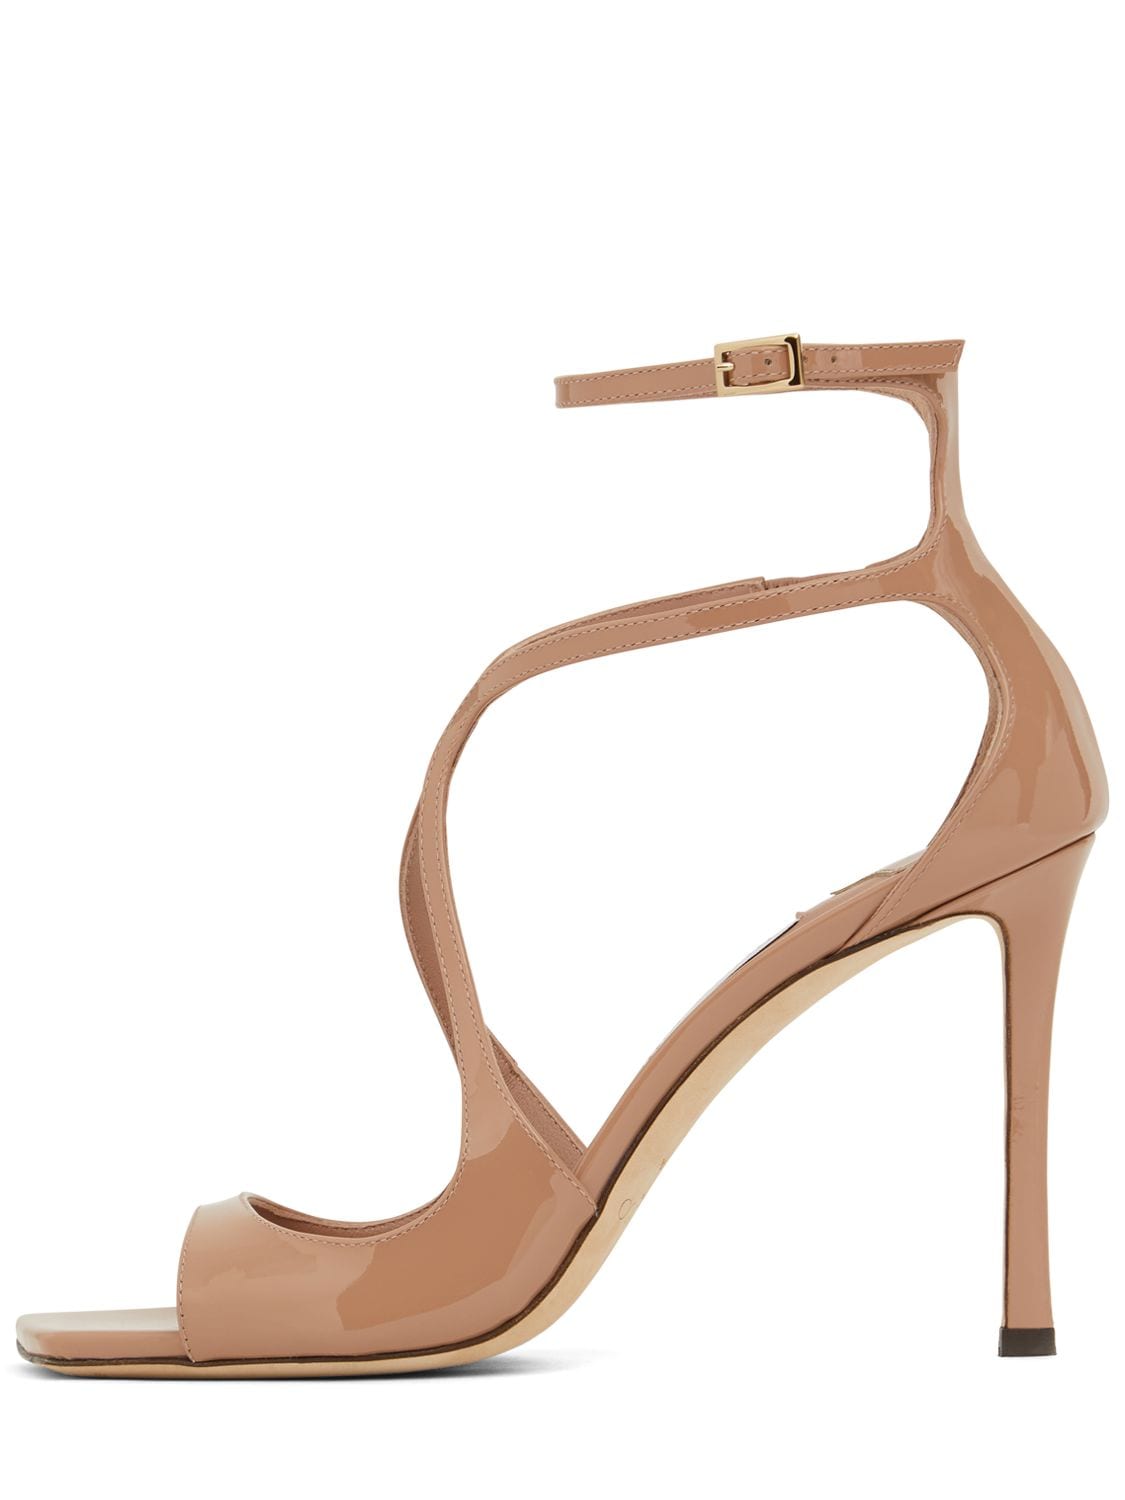 Shop Jimmy Choo 95mm Azia Patent Leather Sandals In Nude